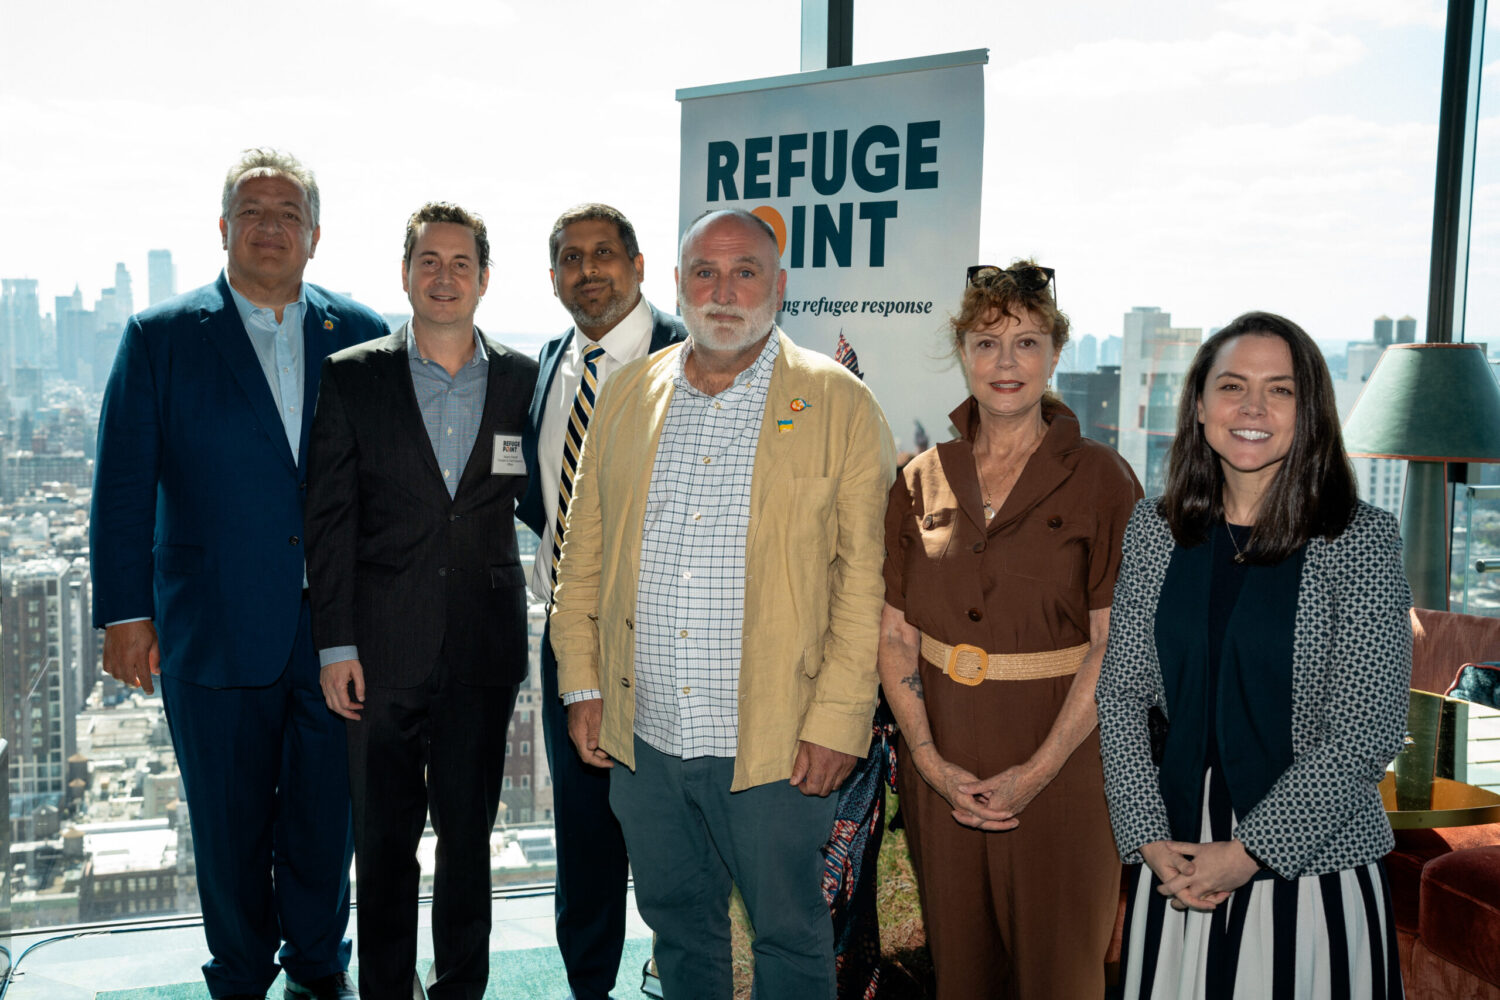 Initiative to reunite one million refugee families launched by RefugePoint at humanitarian chef José Andrés’ Nubeluz, with support from Susan Sarandon and Noubar Afeyan, Moderna Co-founder and Chairman